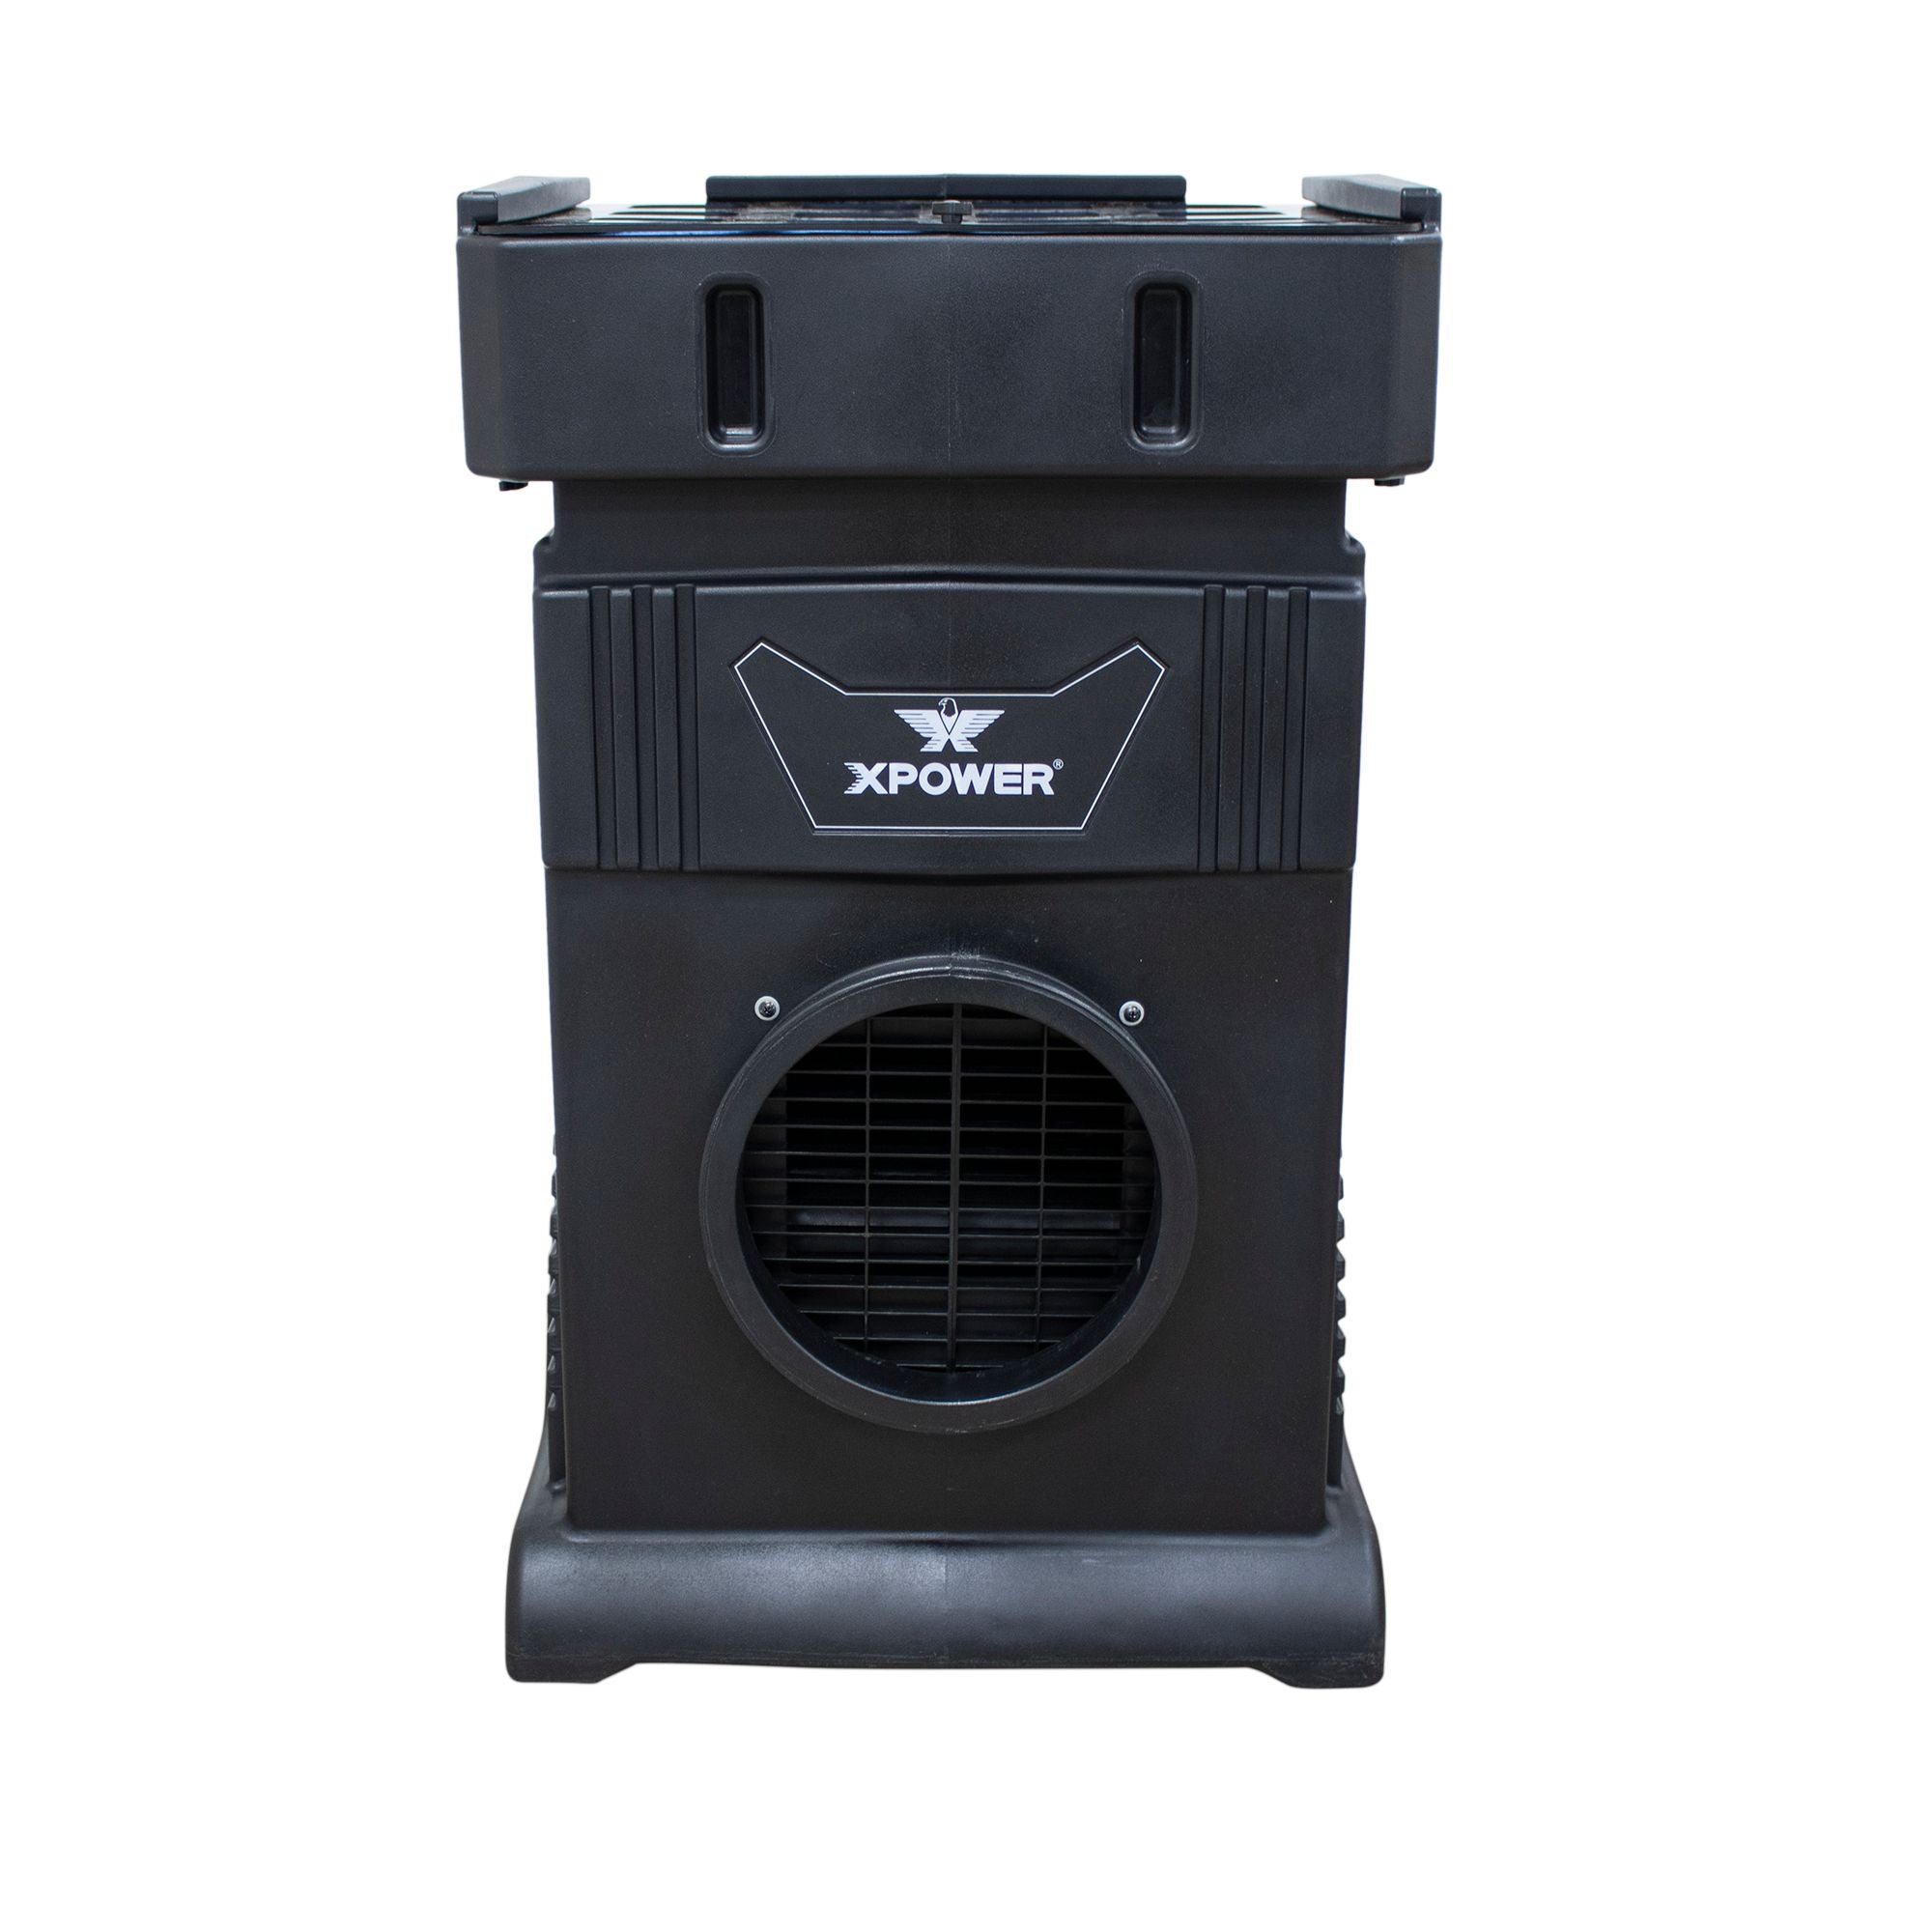 Dark Slate Gray XPOWER AP-1800D MEGA Commercial HEPA Filtration Air Purification System